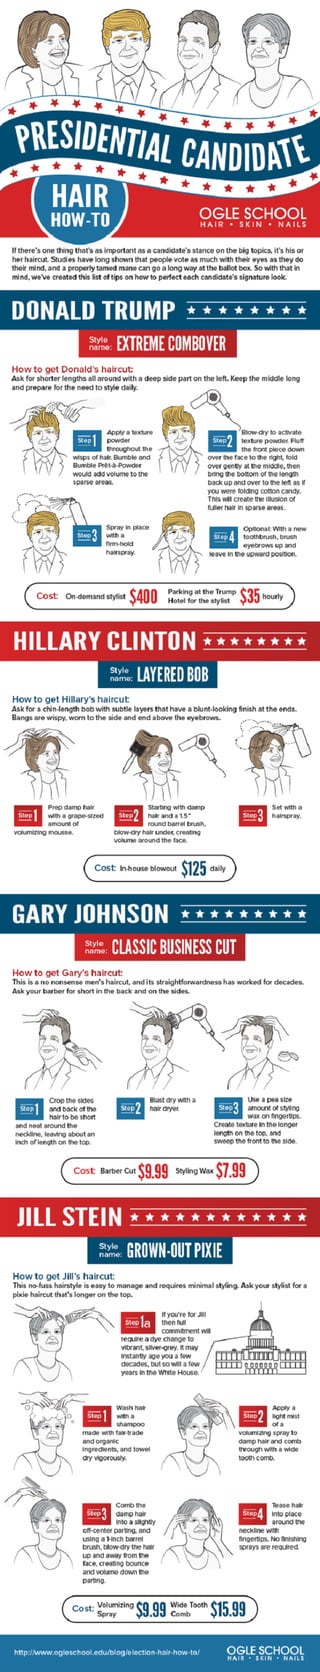 Election Hair How-To